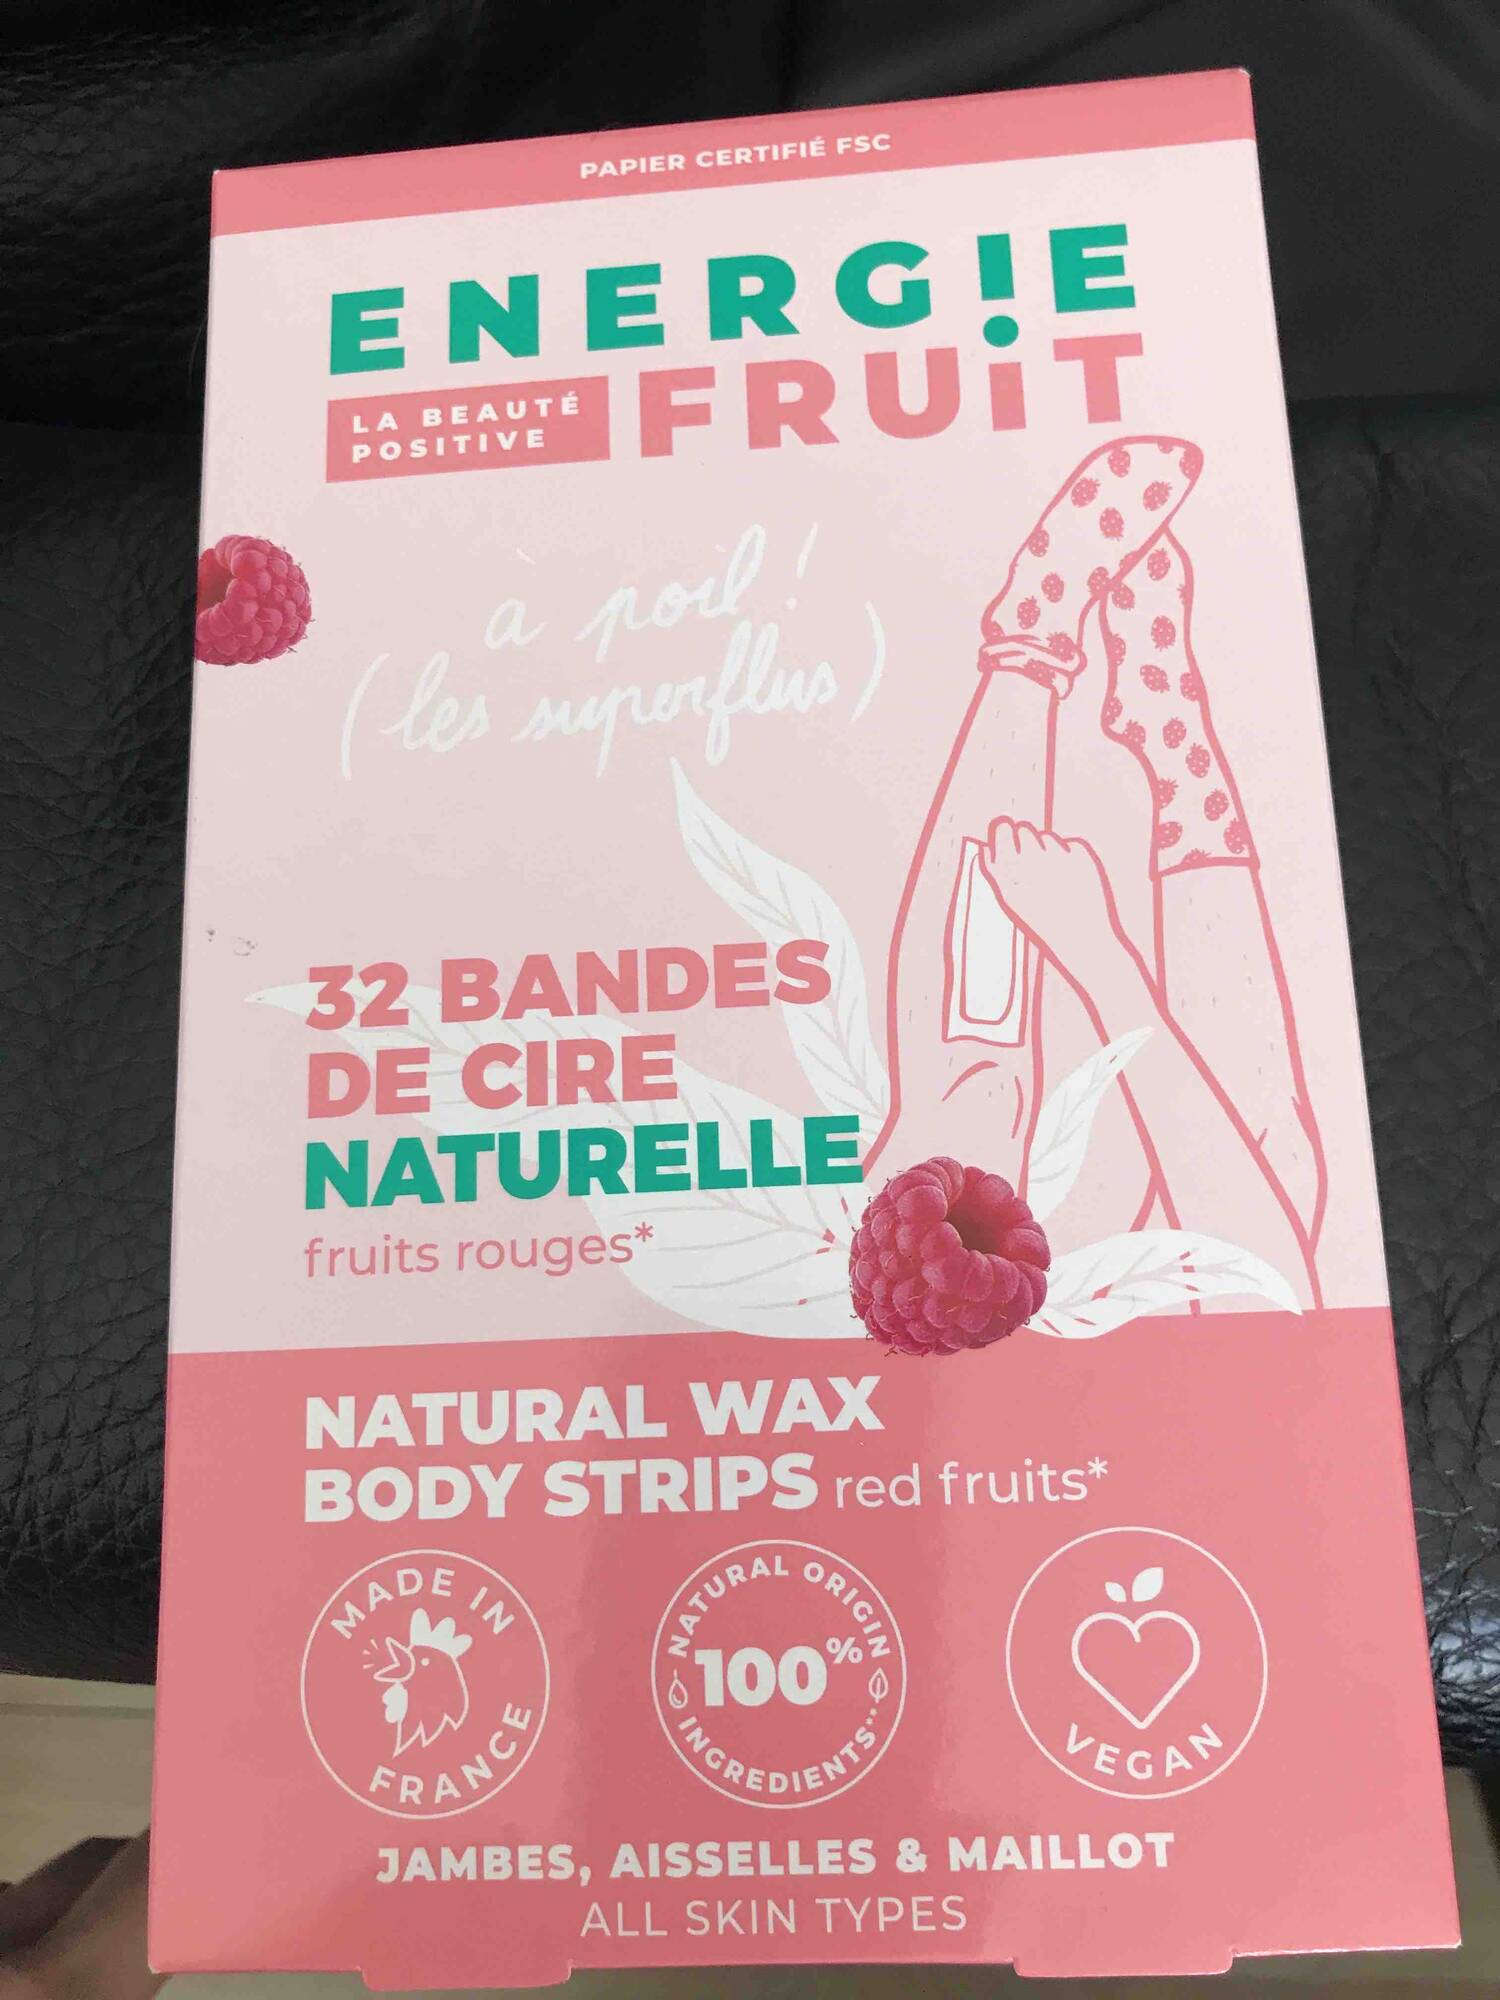 ENERGIE FRUIT - natural wax body strips